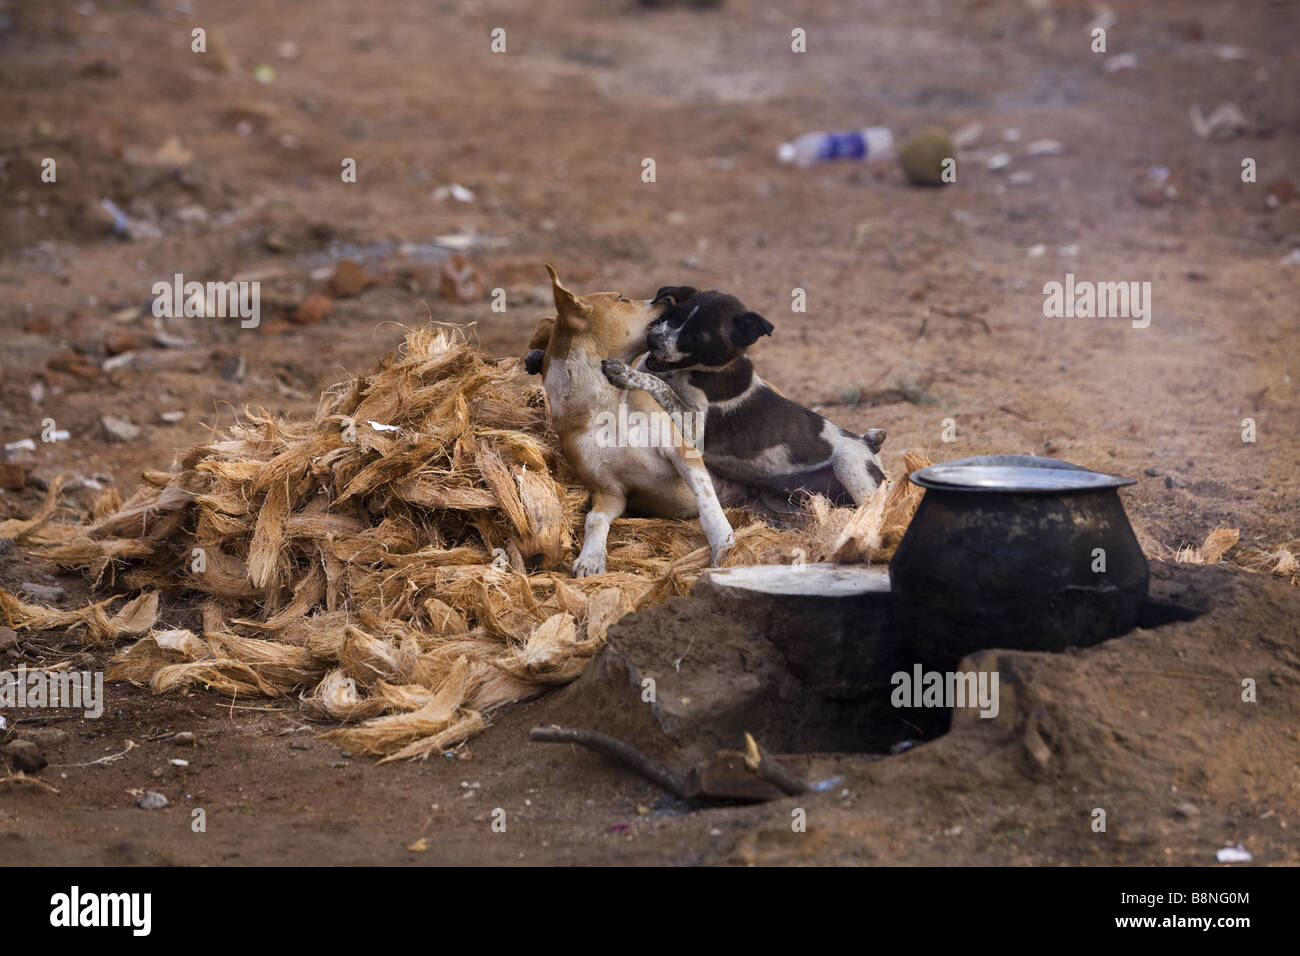 Two dogs playing amongst coconut husks in India Stock Photo